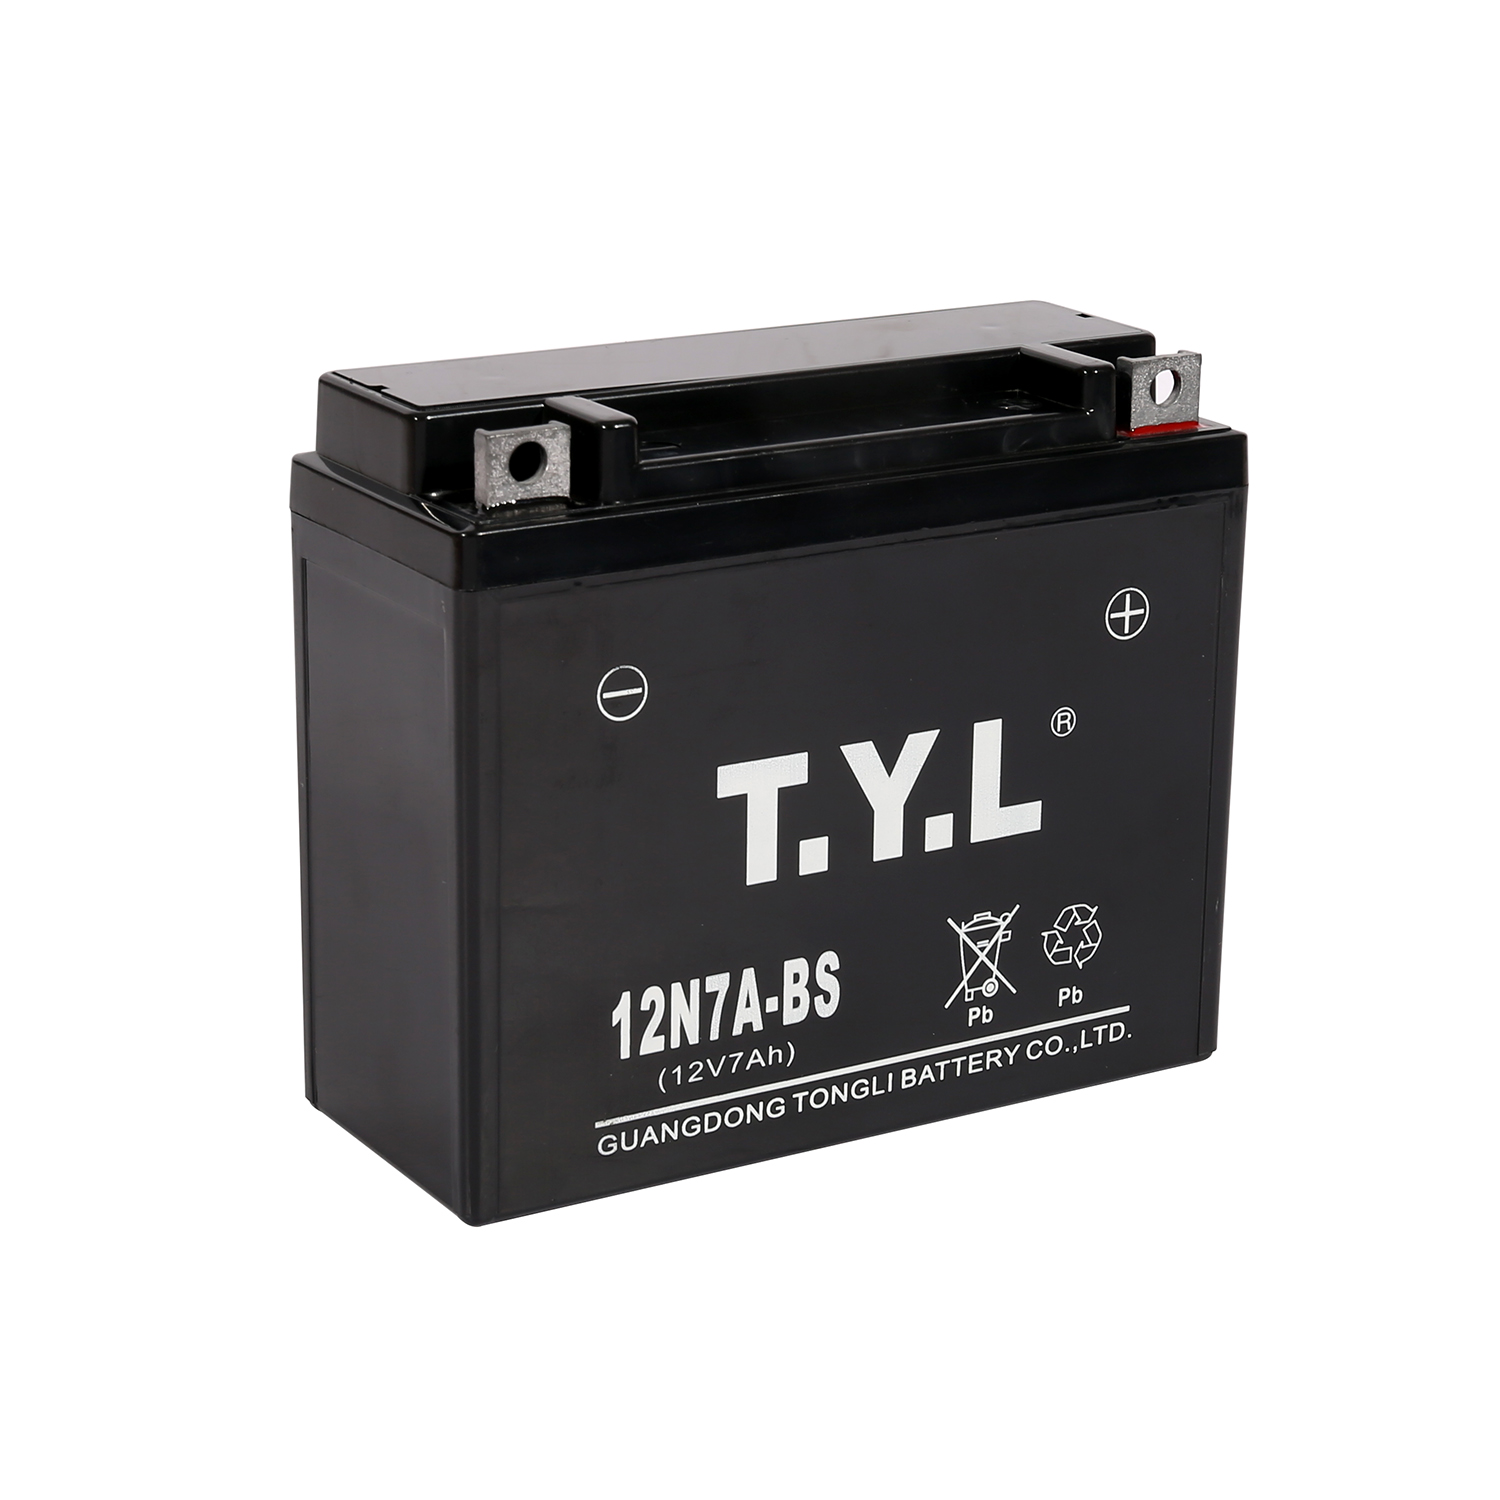 12N7A-BS Wet Charge Maintenance Free Battery